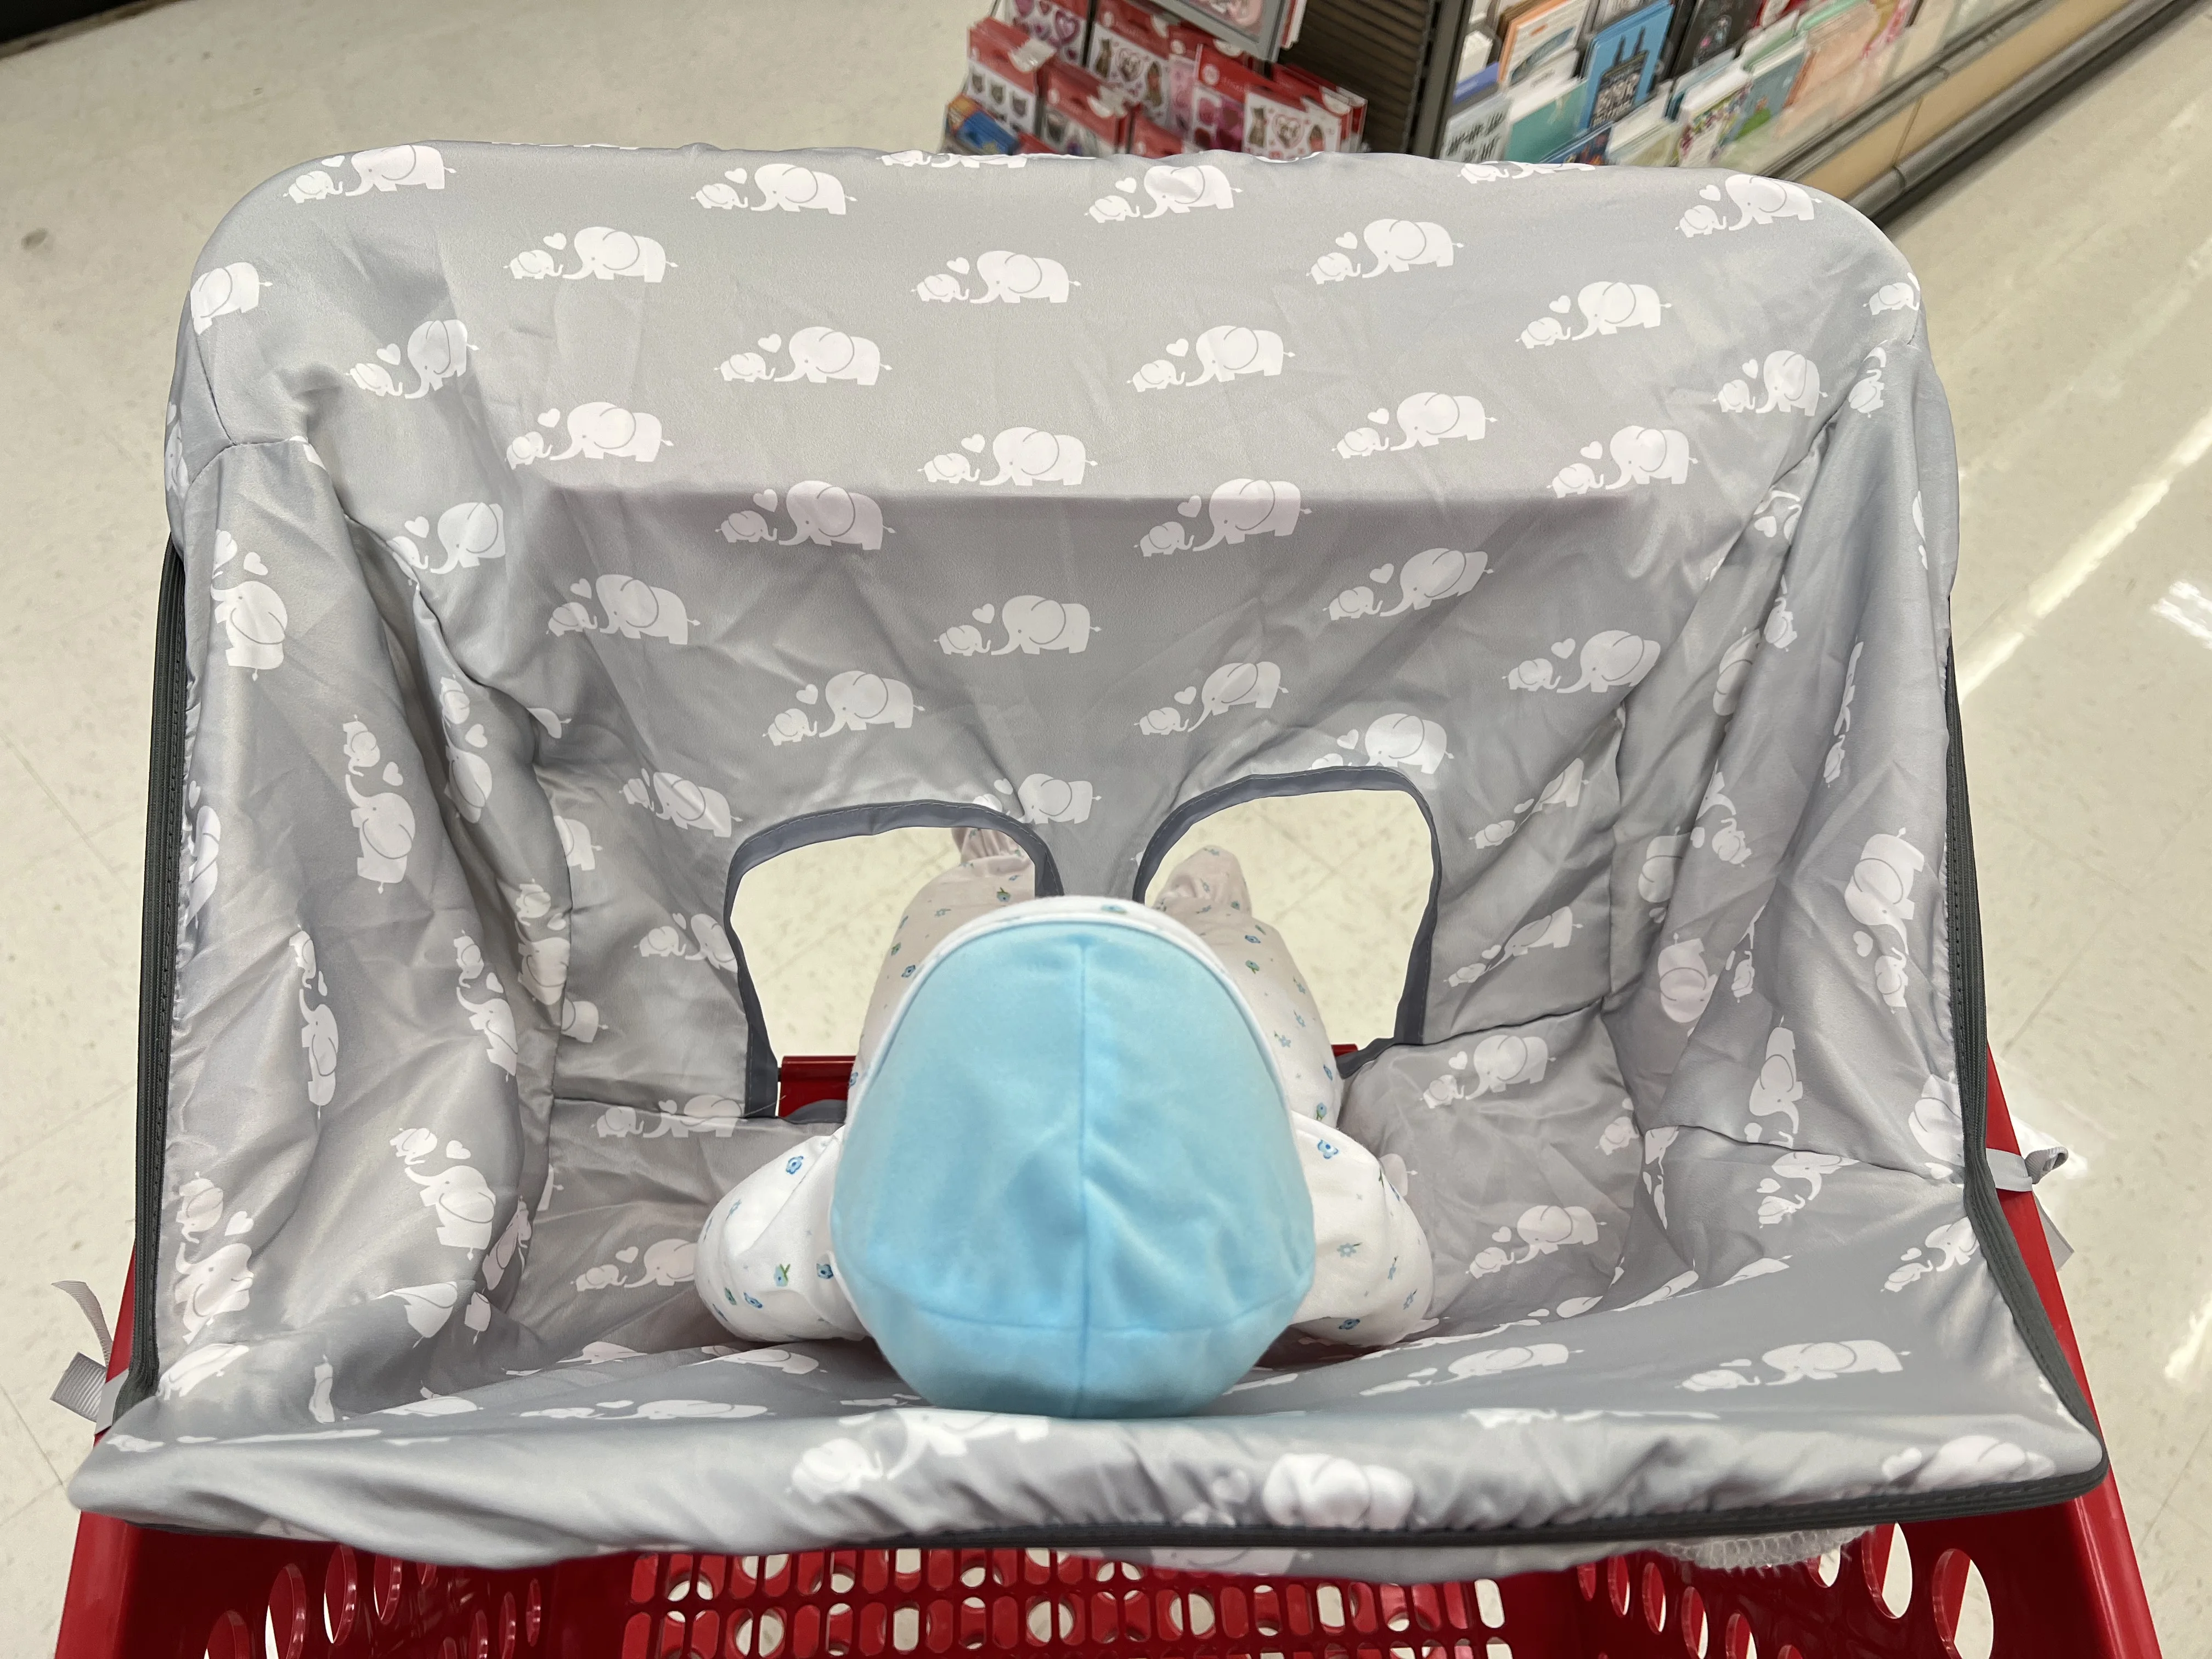 Infant supermarket grocery shopping cart cover baby seat Pad anti-dirty cover Kids Traveling Seat Cushion No dirty portable